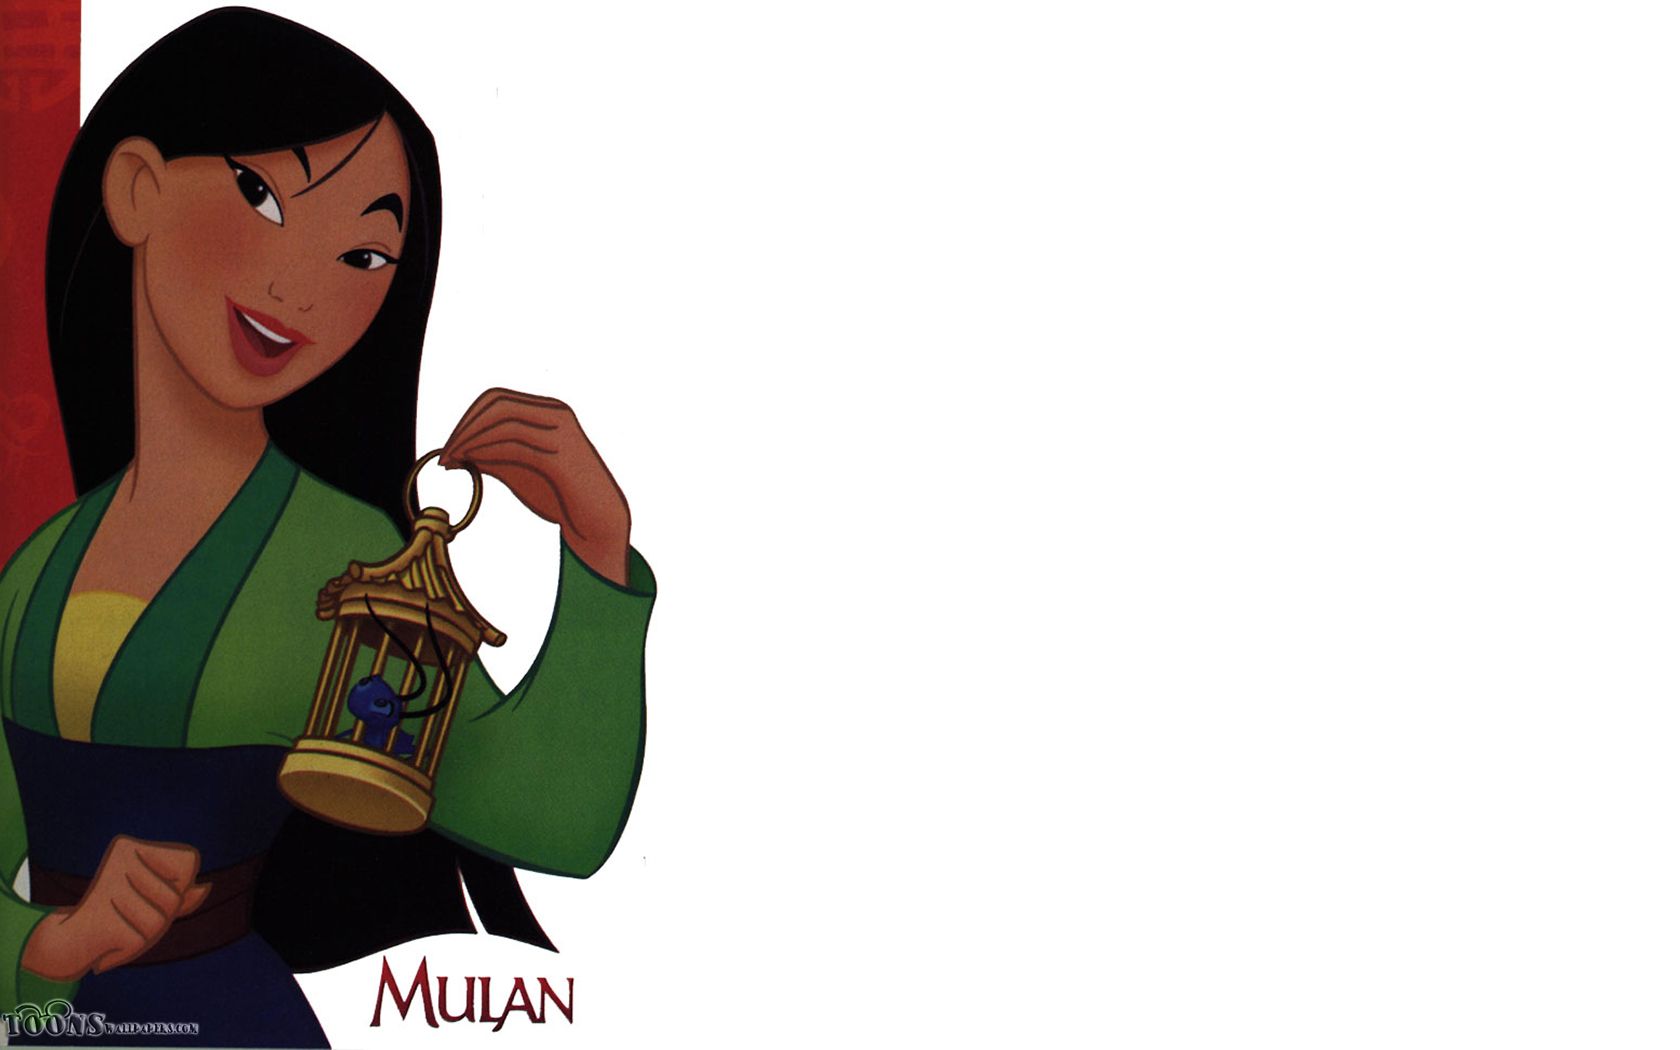 Mulan is a 1998 American animated action-adventure film produced by Walt Disney Feature Animation. - Mulan